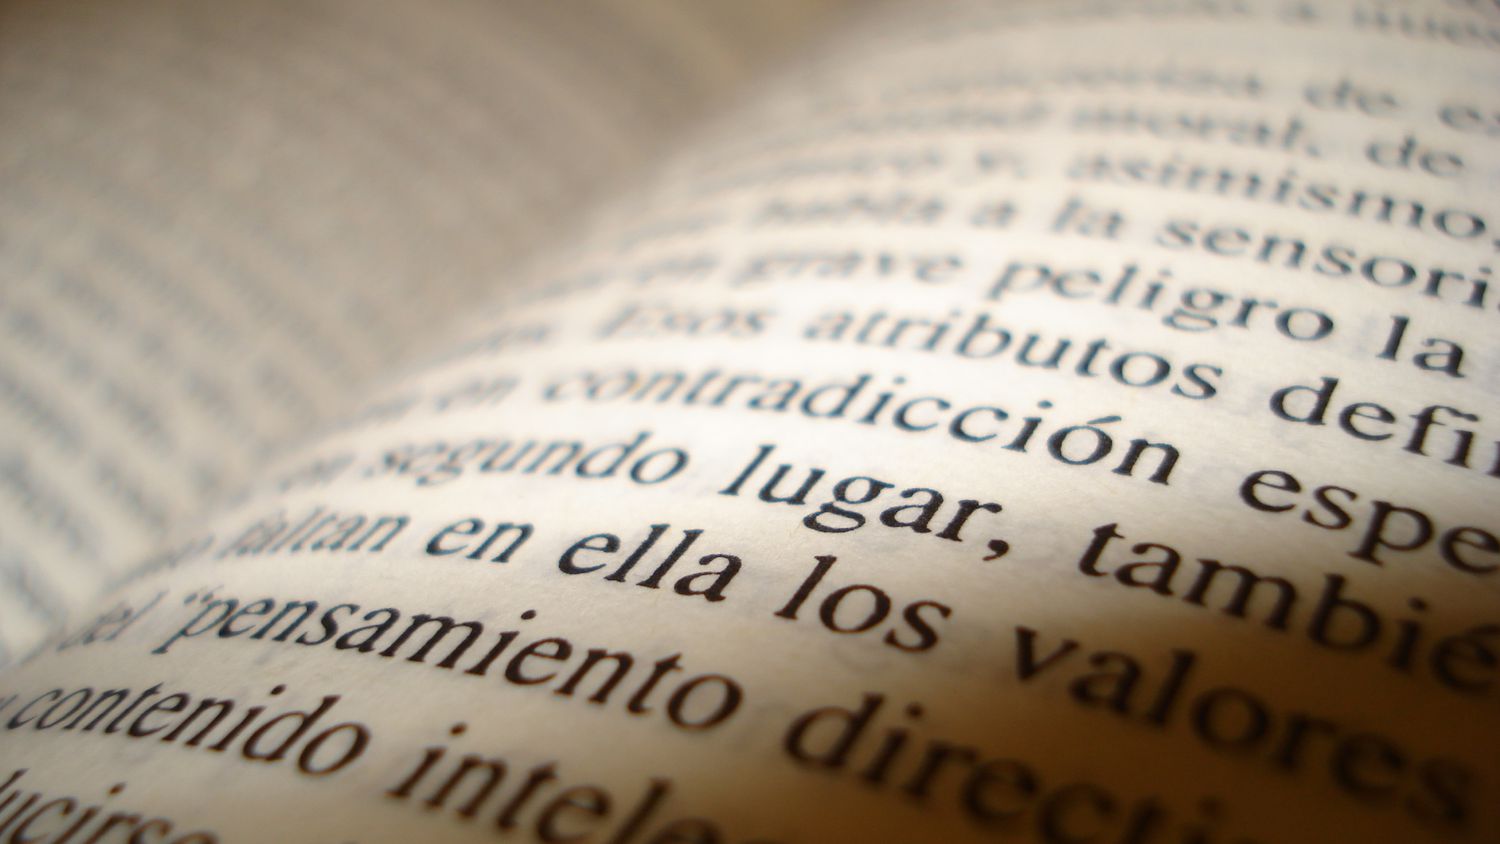 The Difference Between 'Tengas' And 'Tienes' In Spanish